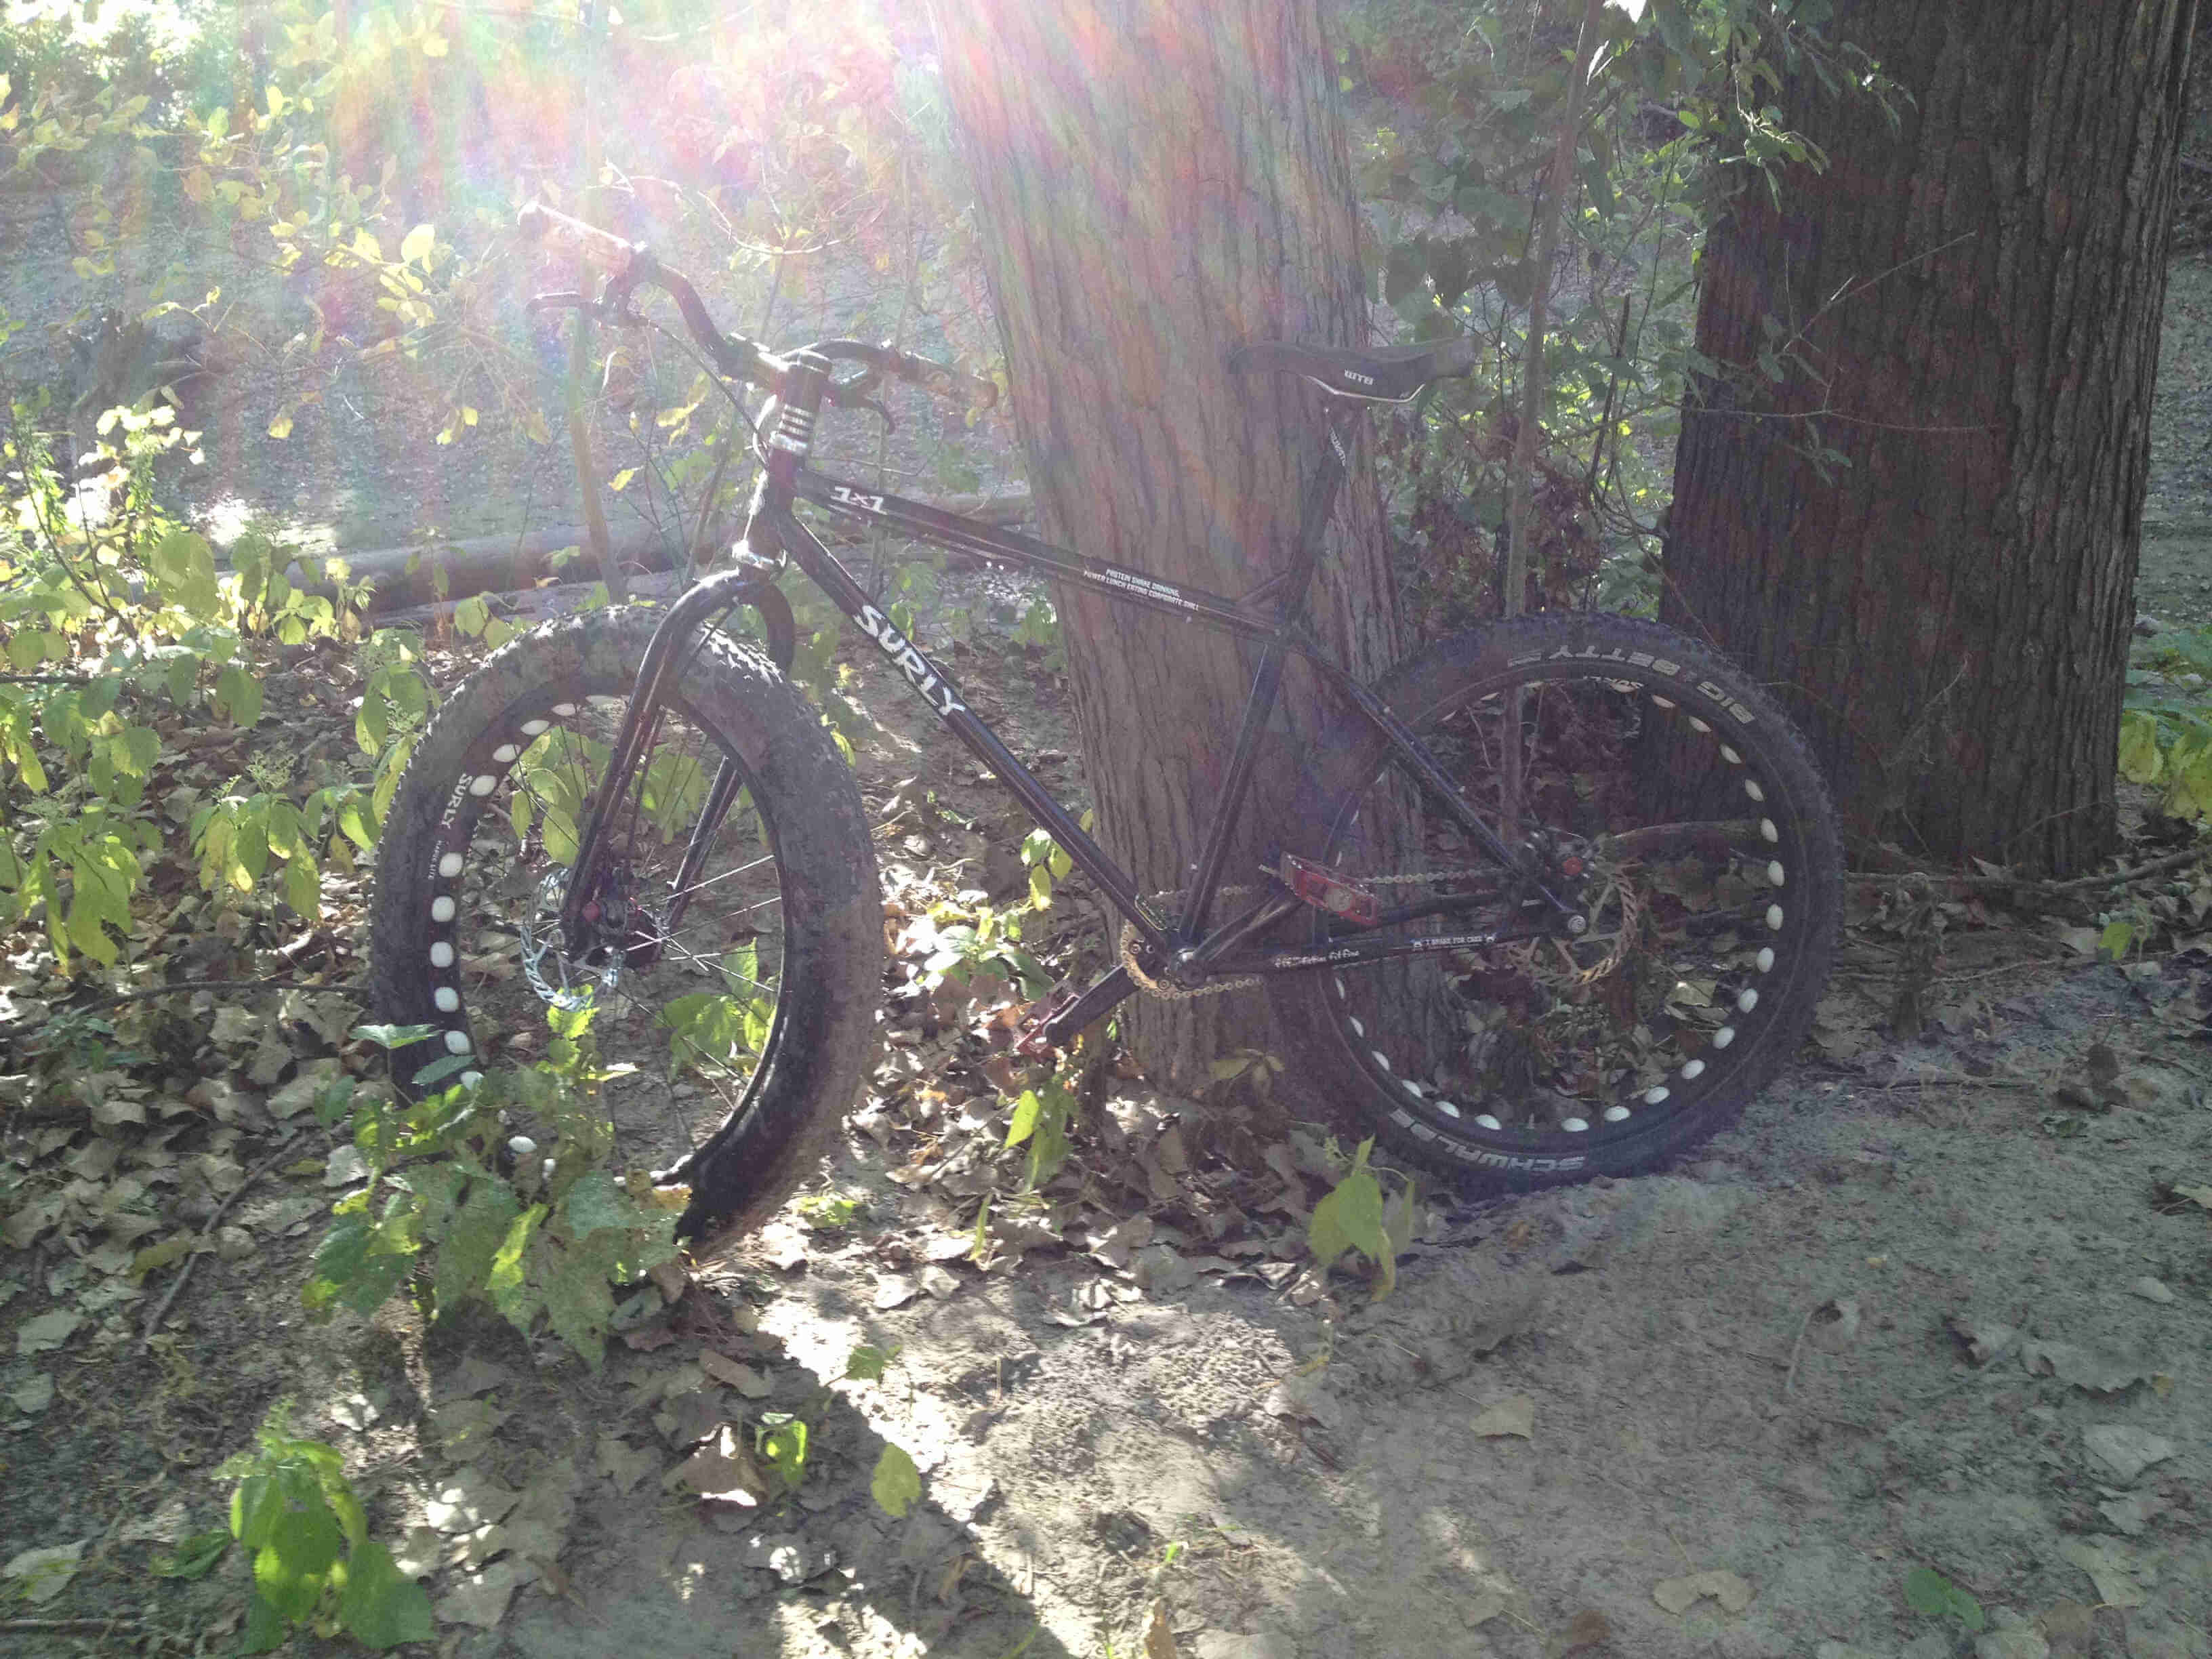 Left side view of a black Surly 1x1 bike, parked on sand, leaves and weeds, leaning against a tree